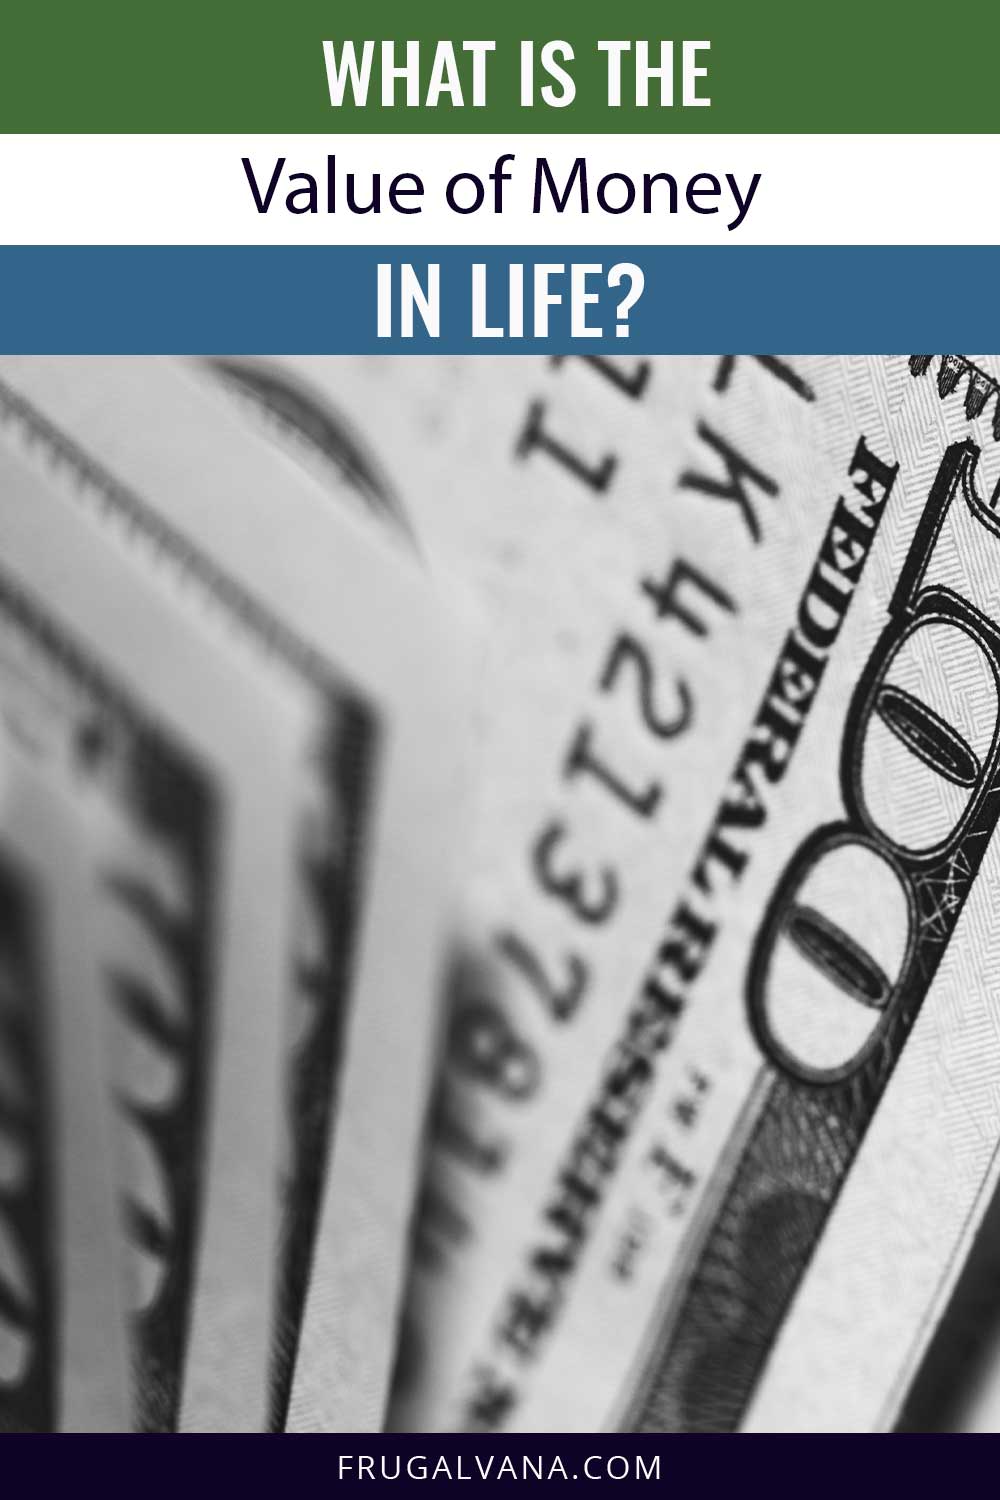 What Is the Value of Money In Life?